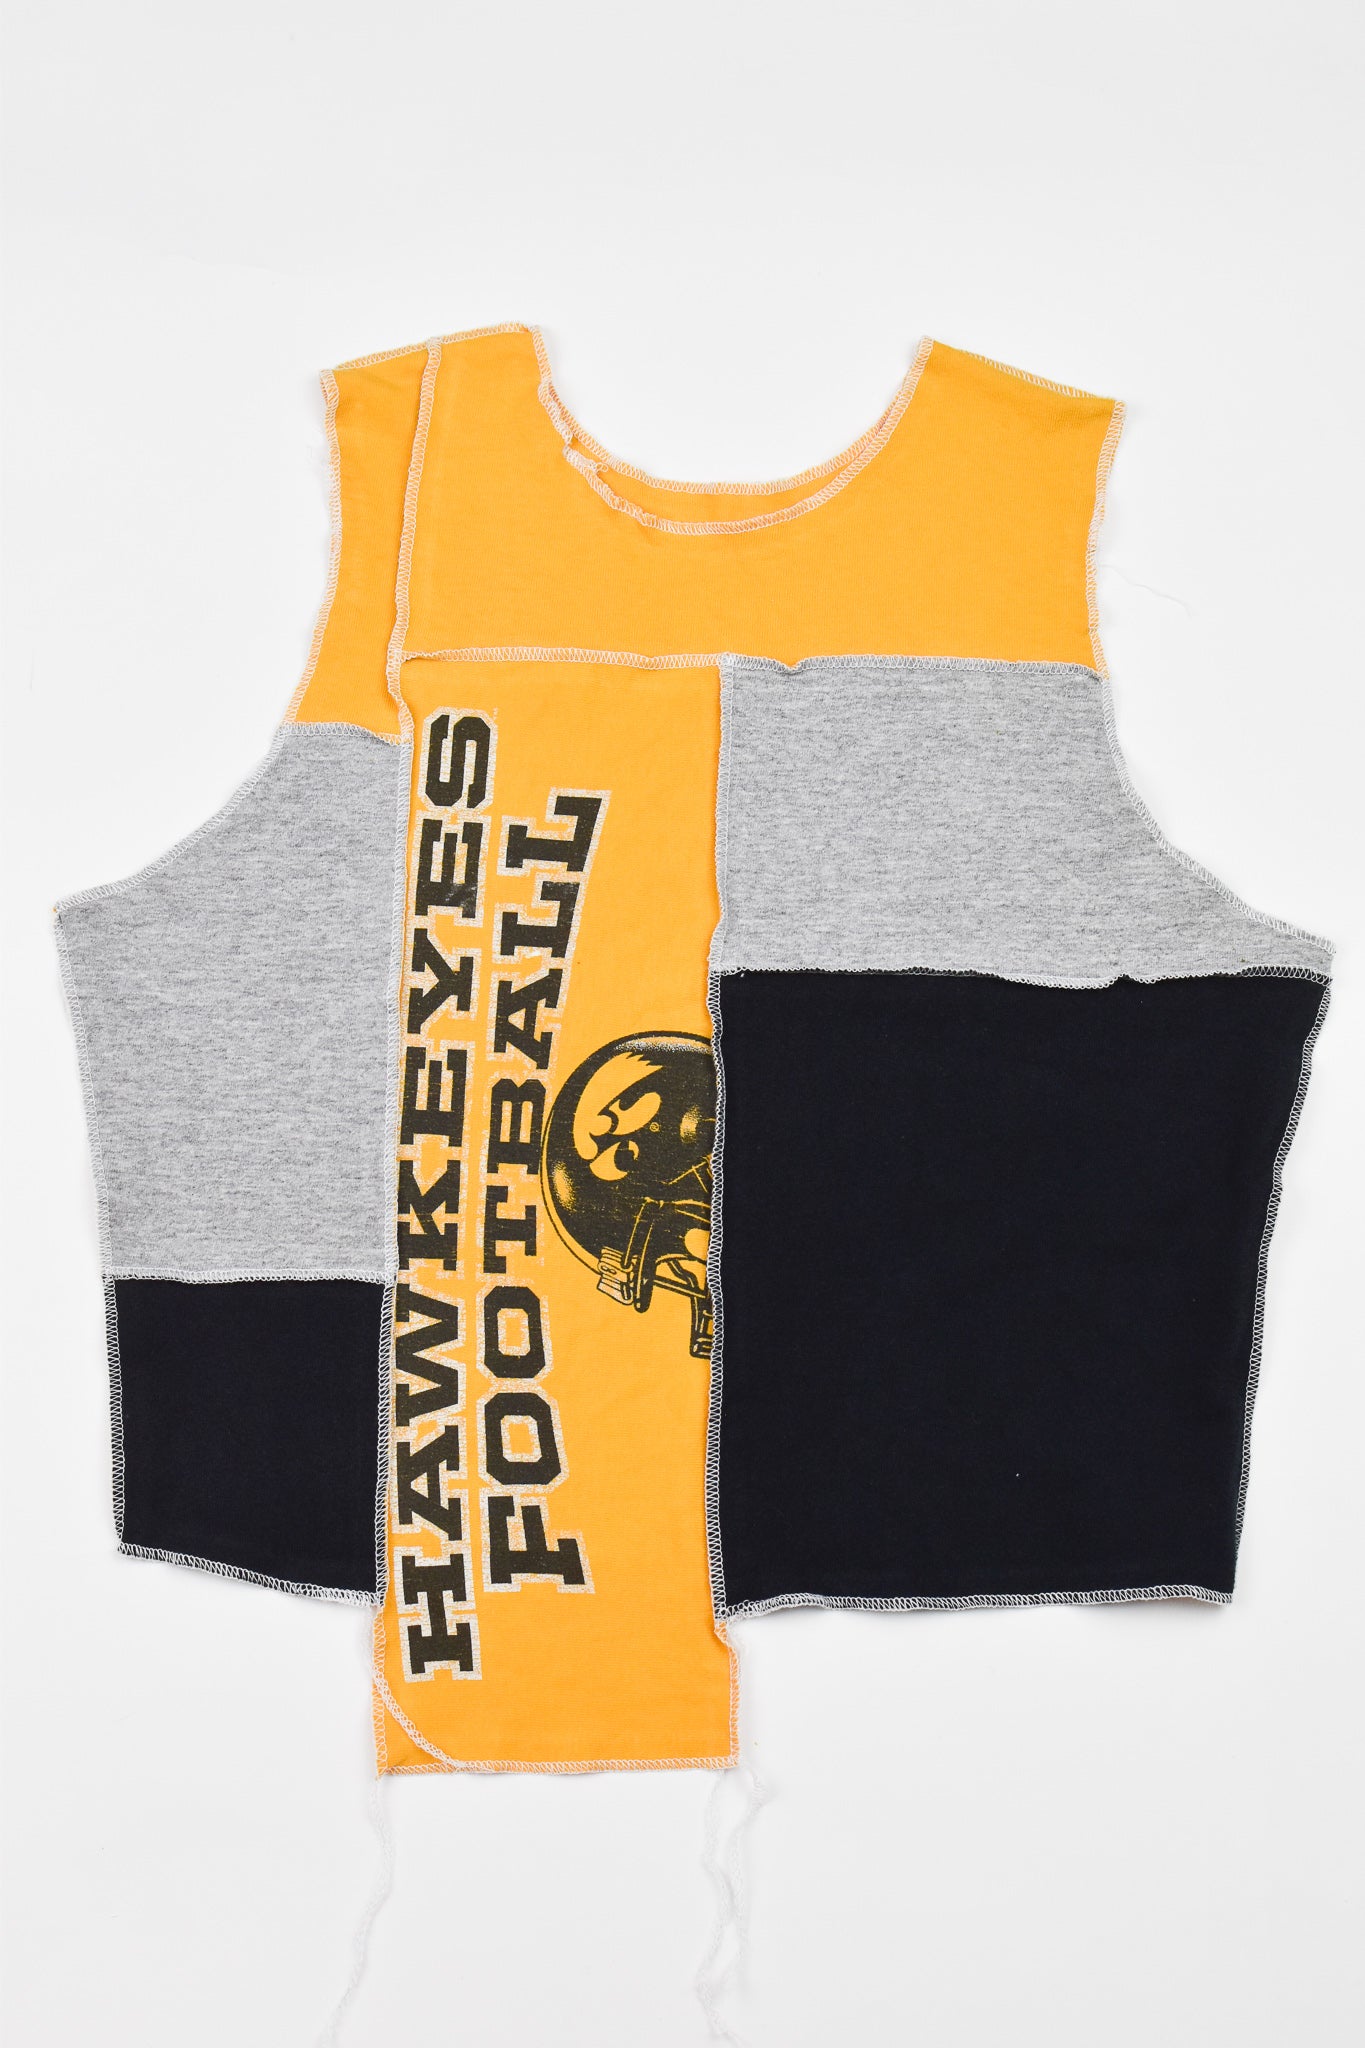 Upcycled Iowa Scrappy Tank Top